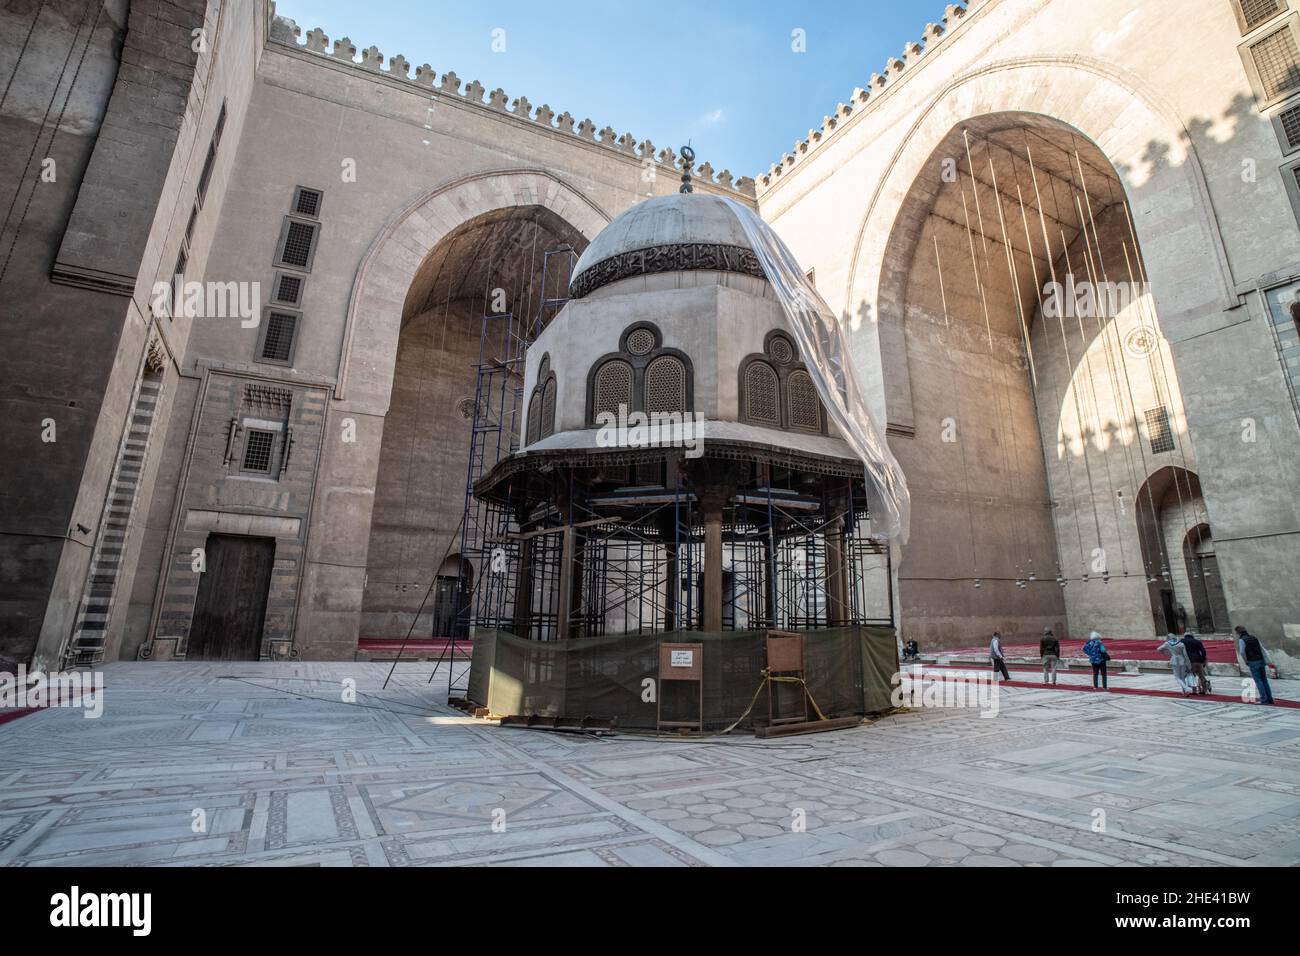 The central courtyard and fountain undergoing repairs at the Mosque of al-sultan Hassan in Cairo, Egypt. Stock Photo